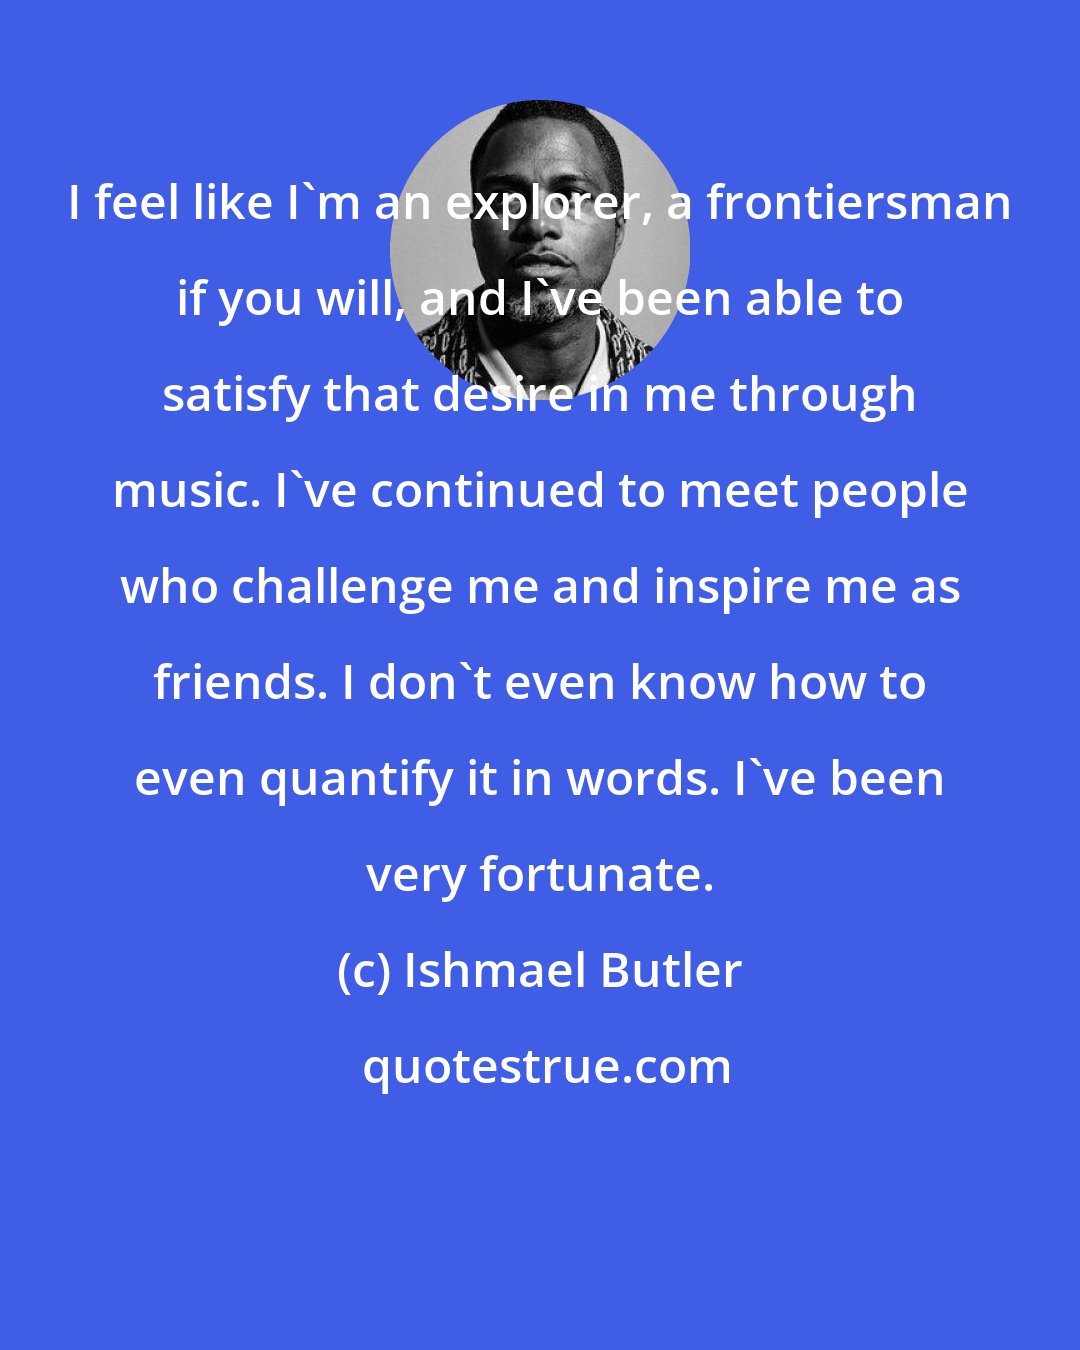 Ishmael Butler: I feel like I'm an explorer, a frontiersman if you will, and I've been able to satisfy that desire in me through music. I've continued to meet people who challenge me and inspire me as friends. I don't even know how to even quantify it in words. I've been very fortunate.